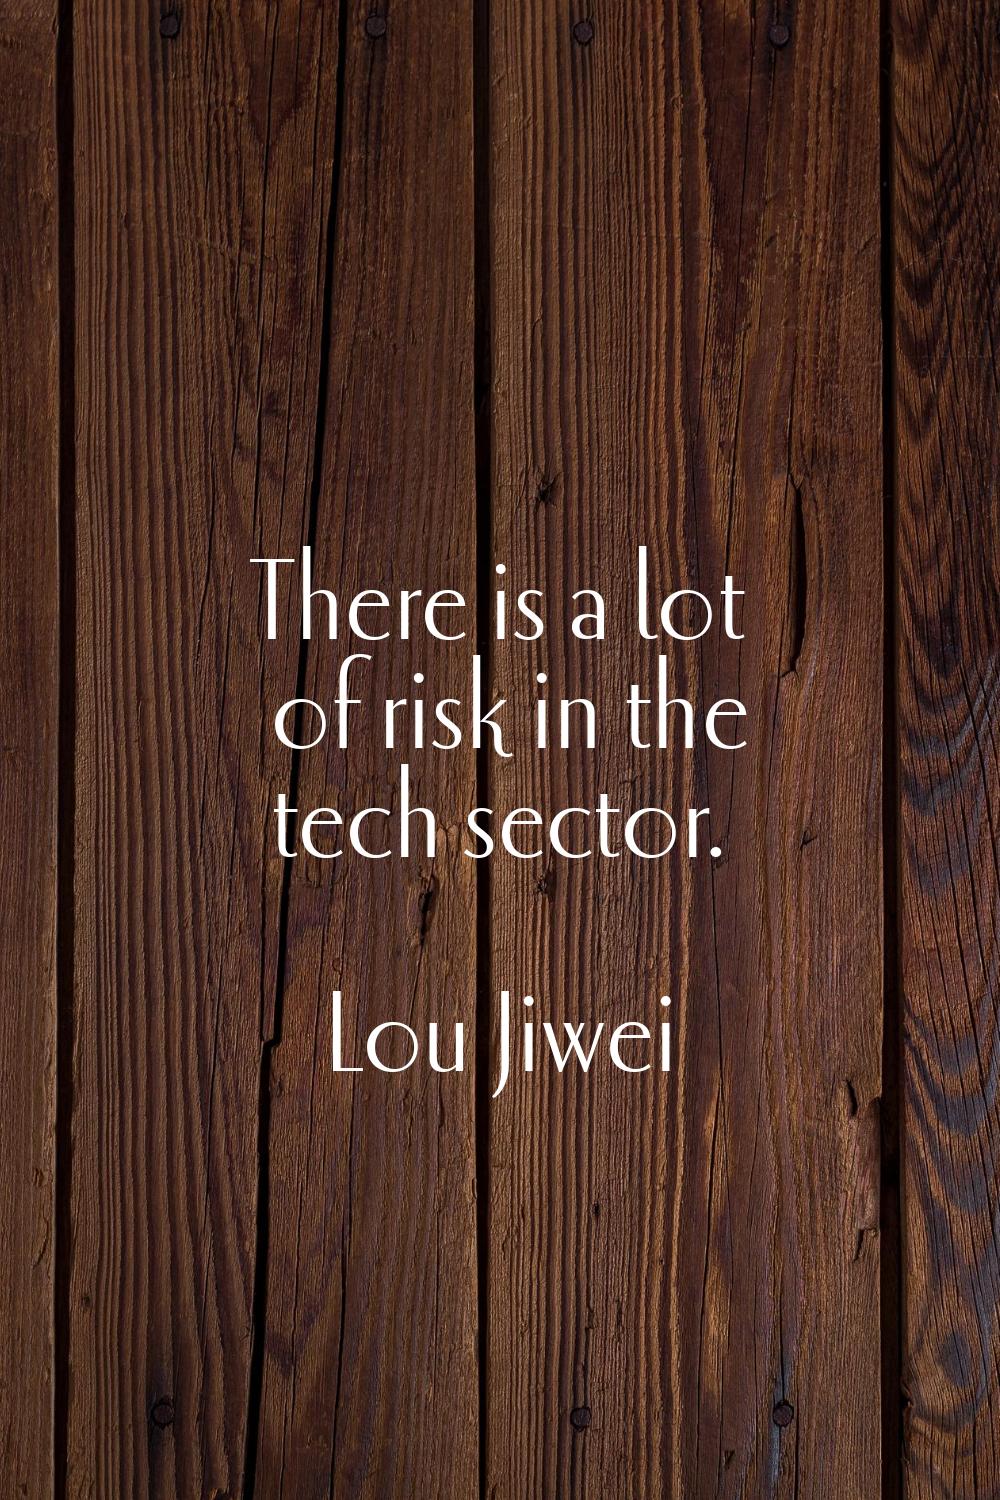 There is a lot of risk in the tech sector.